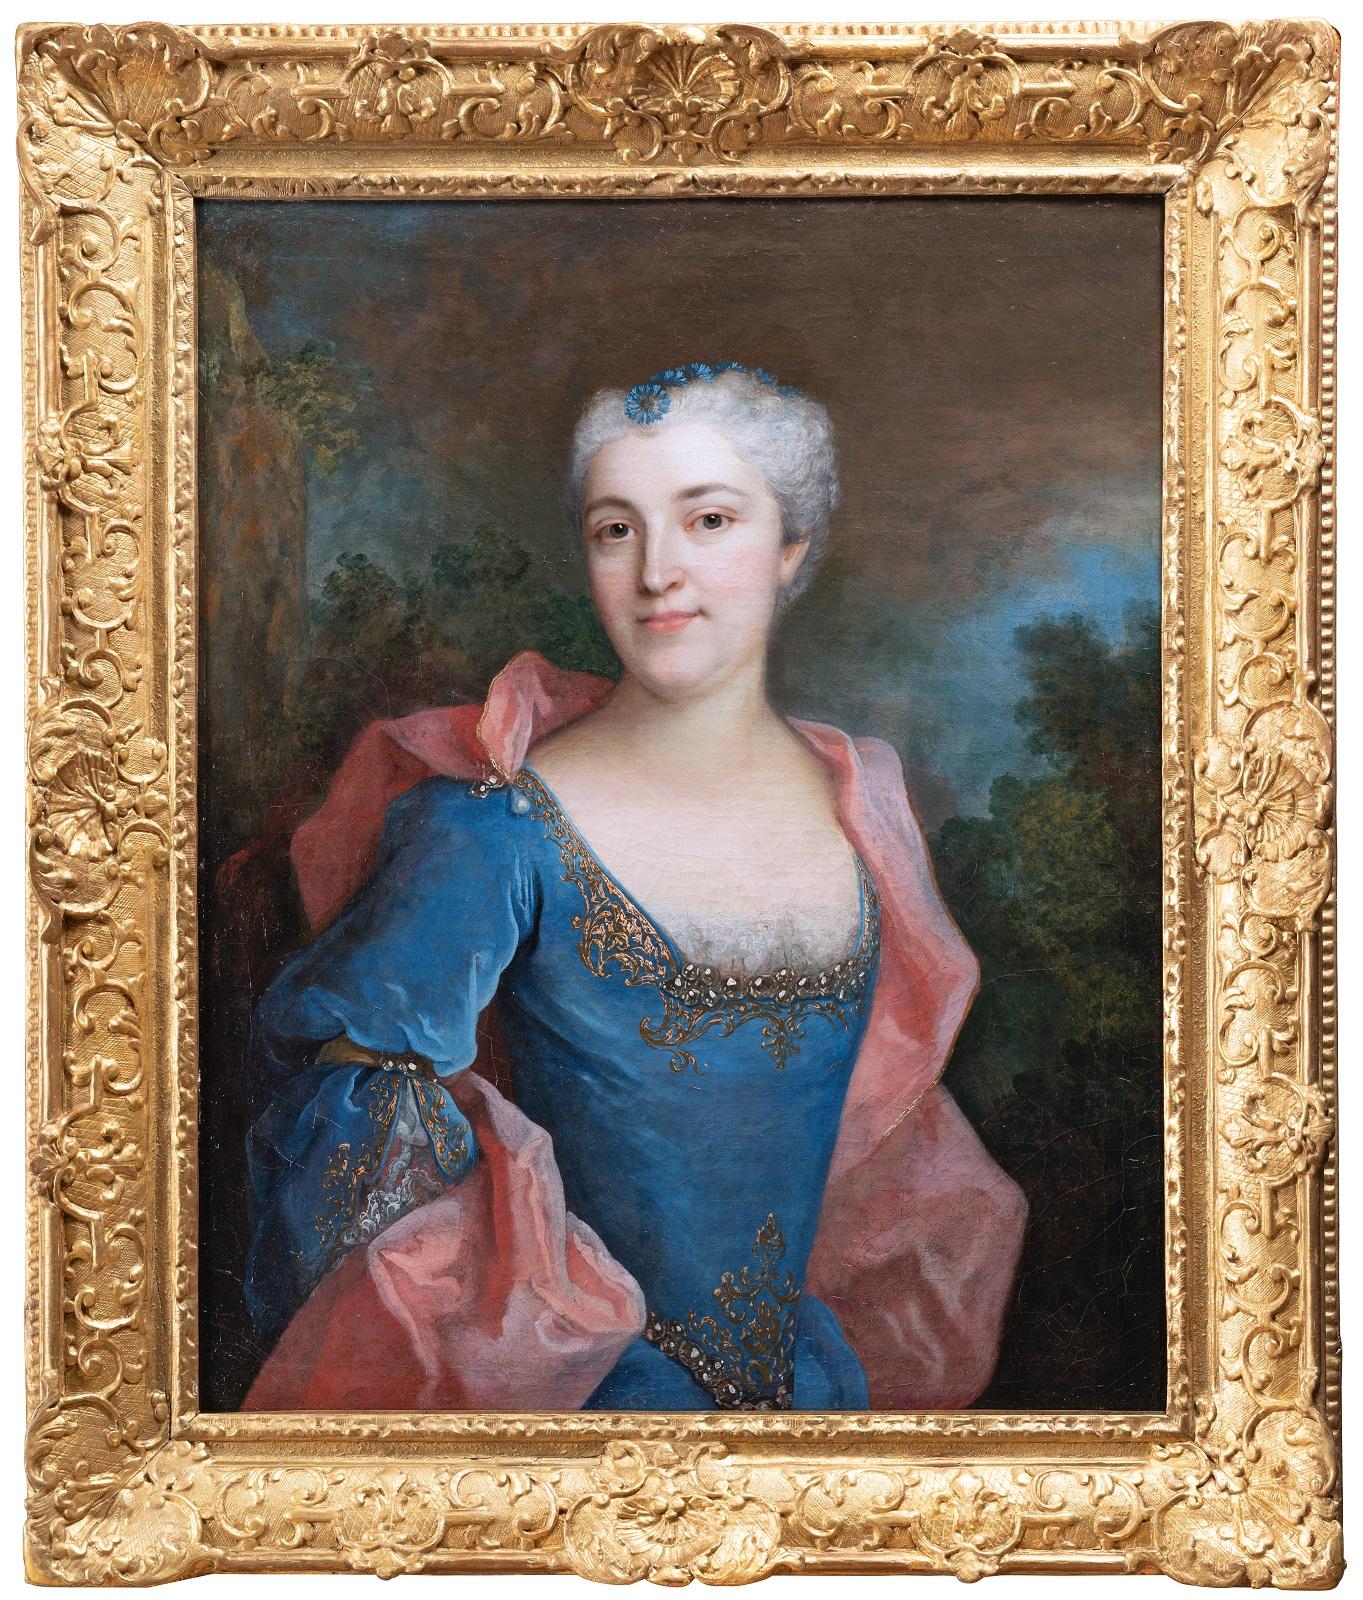 18th c. French Portrait of Louise Dorothea von Hoffman, signed H. Millot, 1724